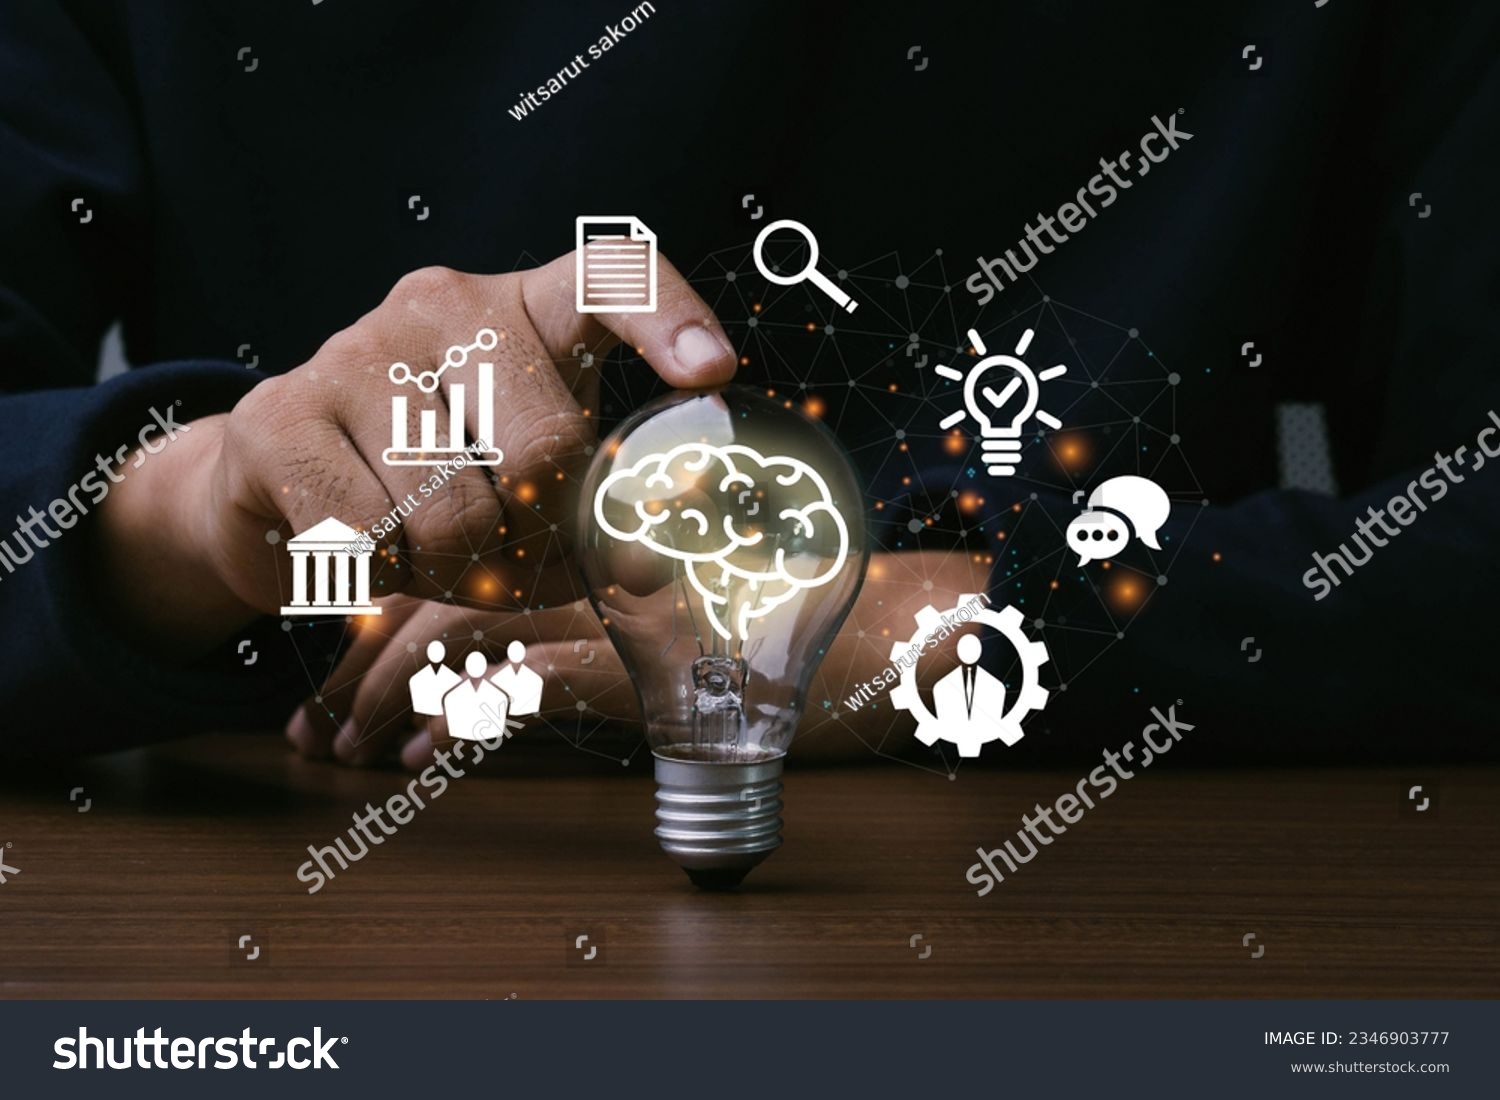 Skills,Knowledge and Ability.Man hand touching light bulb with icon of skills.Thinking, Creativity, Management, Digital skill.Education concept. #2346903777